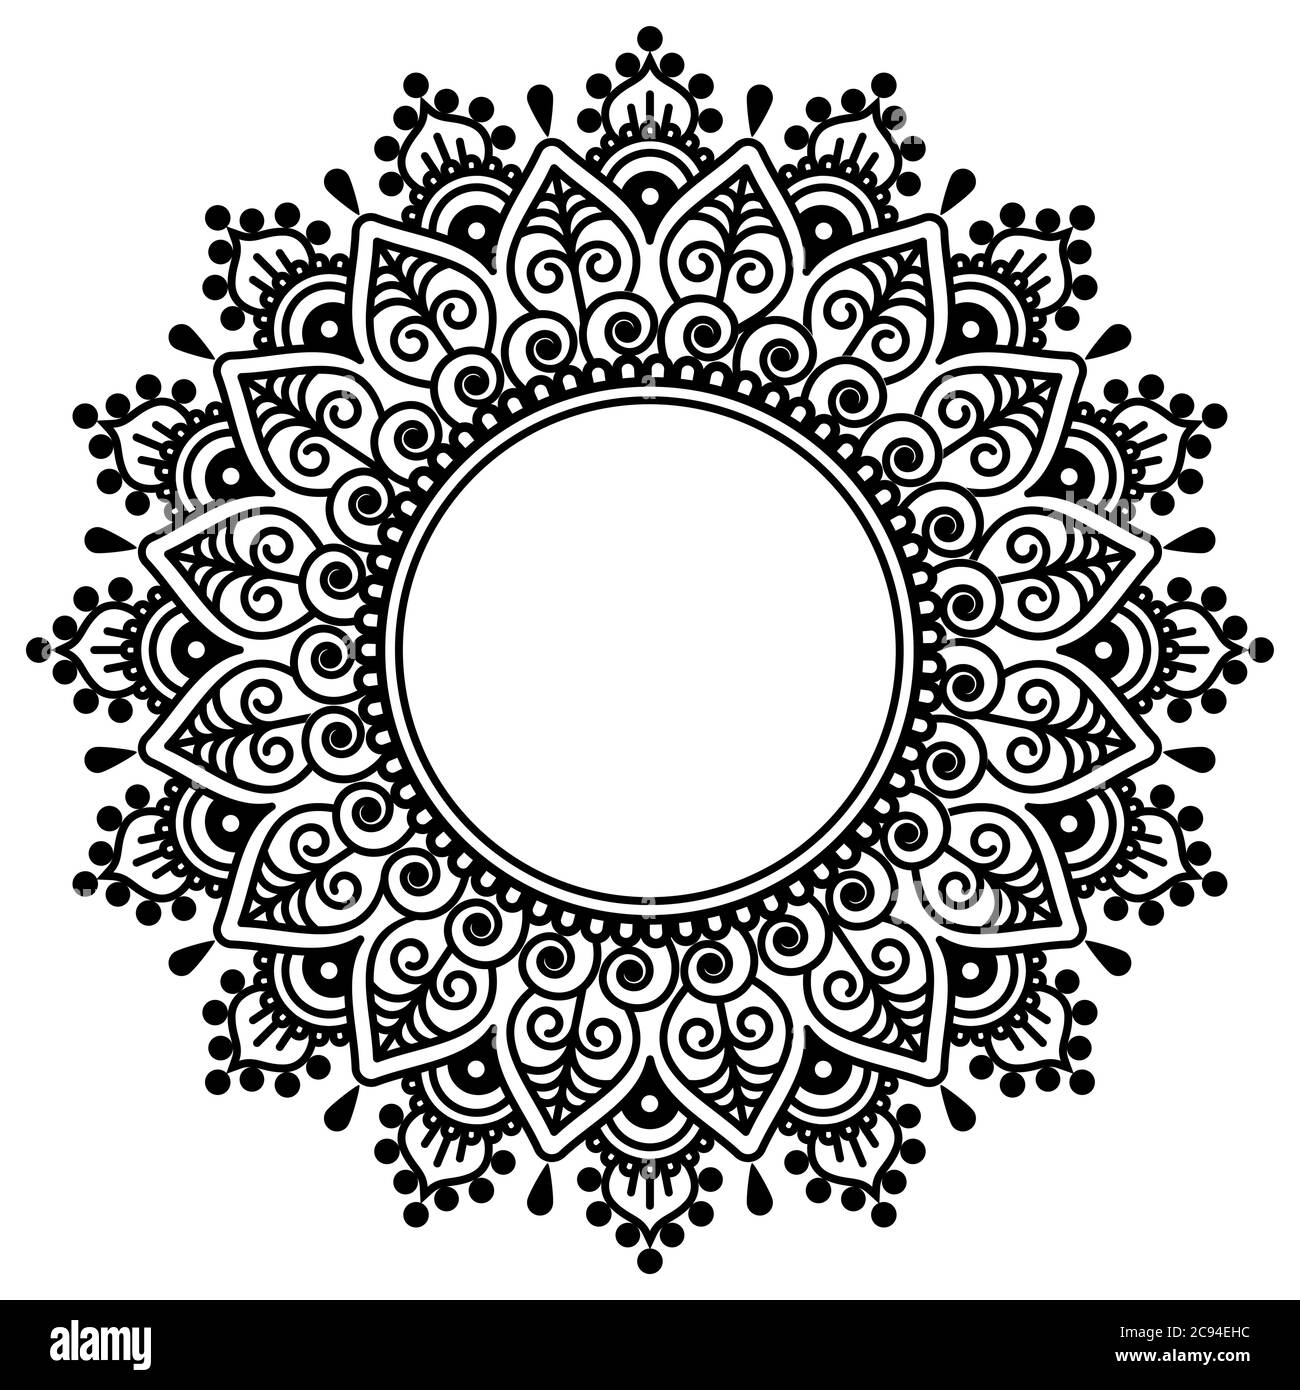 Indian pattern Black and White Stock Photos & Images - Alamy